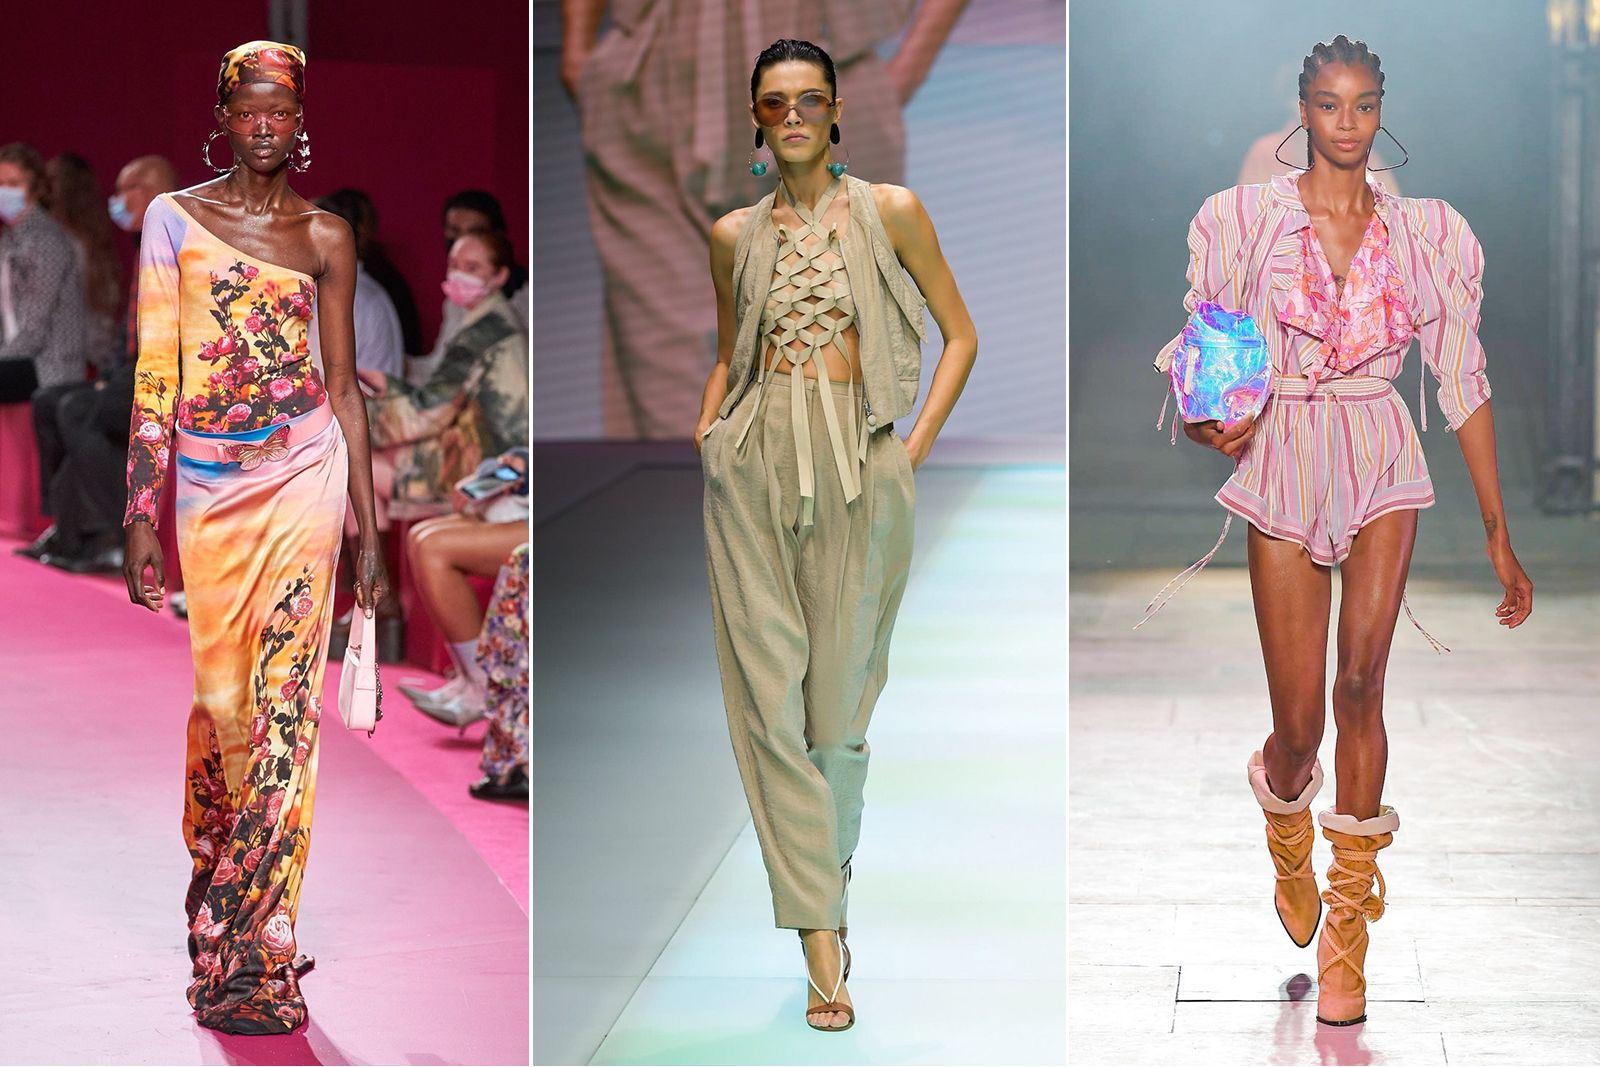 Models walk the runway wearing statement earrings at (from left to right) Blumarine, Emporio Armani and Isabel Marant 